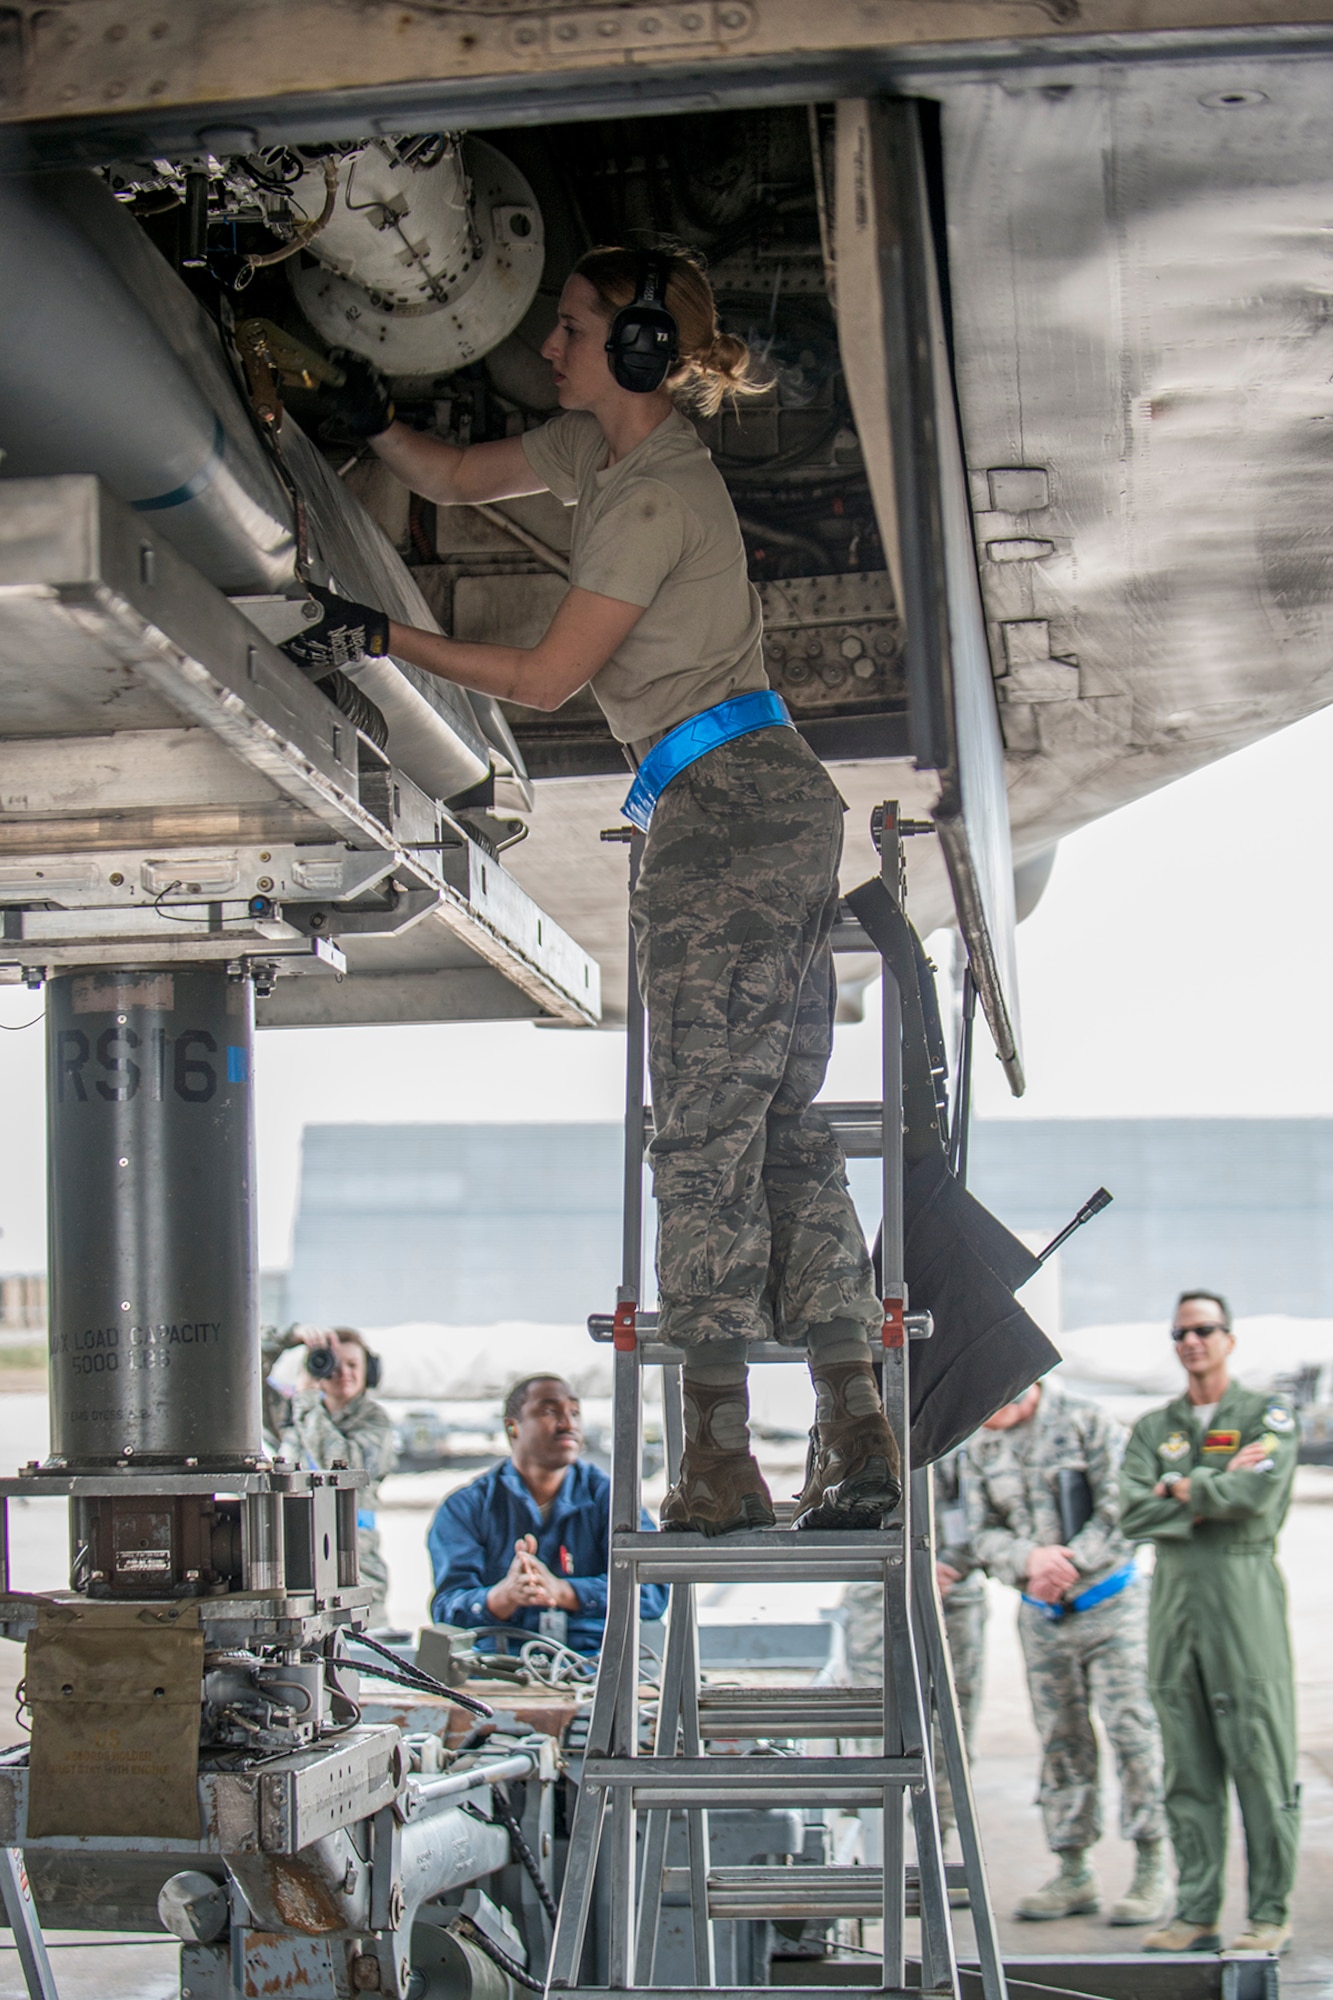 A weapons load crew member assigned to the 489th Maintenance Squadron secures a tie-down strap on a Joint Air-to-Surface Standoff Weapon during a downloading operation from the bomb bay of a B-1 Lancer on Feb. 21, 2016, Dyess Air Force Base, Texas. Members of the Air Force Reserve Command’s 489th Bomb Group participated in an exercise alongside their Active Duty counterparts from the 7th Maintenance Squadron. (U.S. Air Force photo by Master Sgt. Greg Steele/Released)